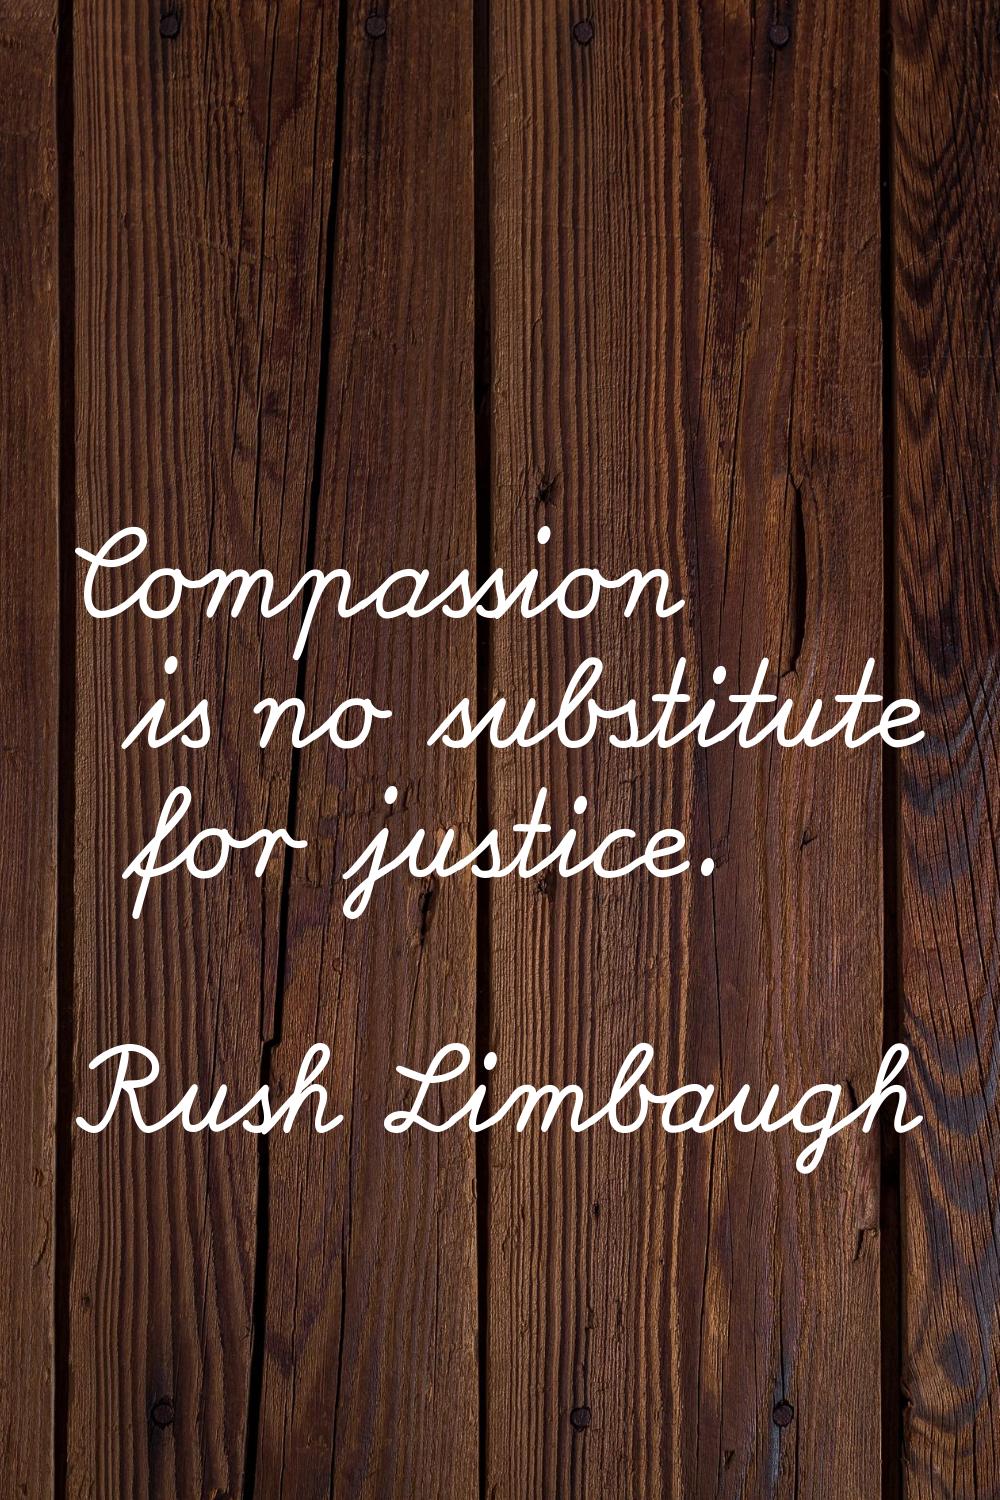 Compassion is no substitute for justice.